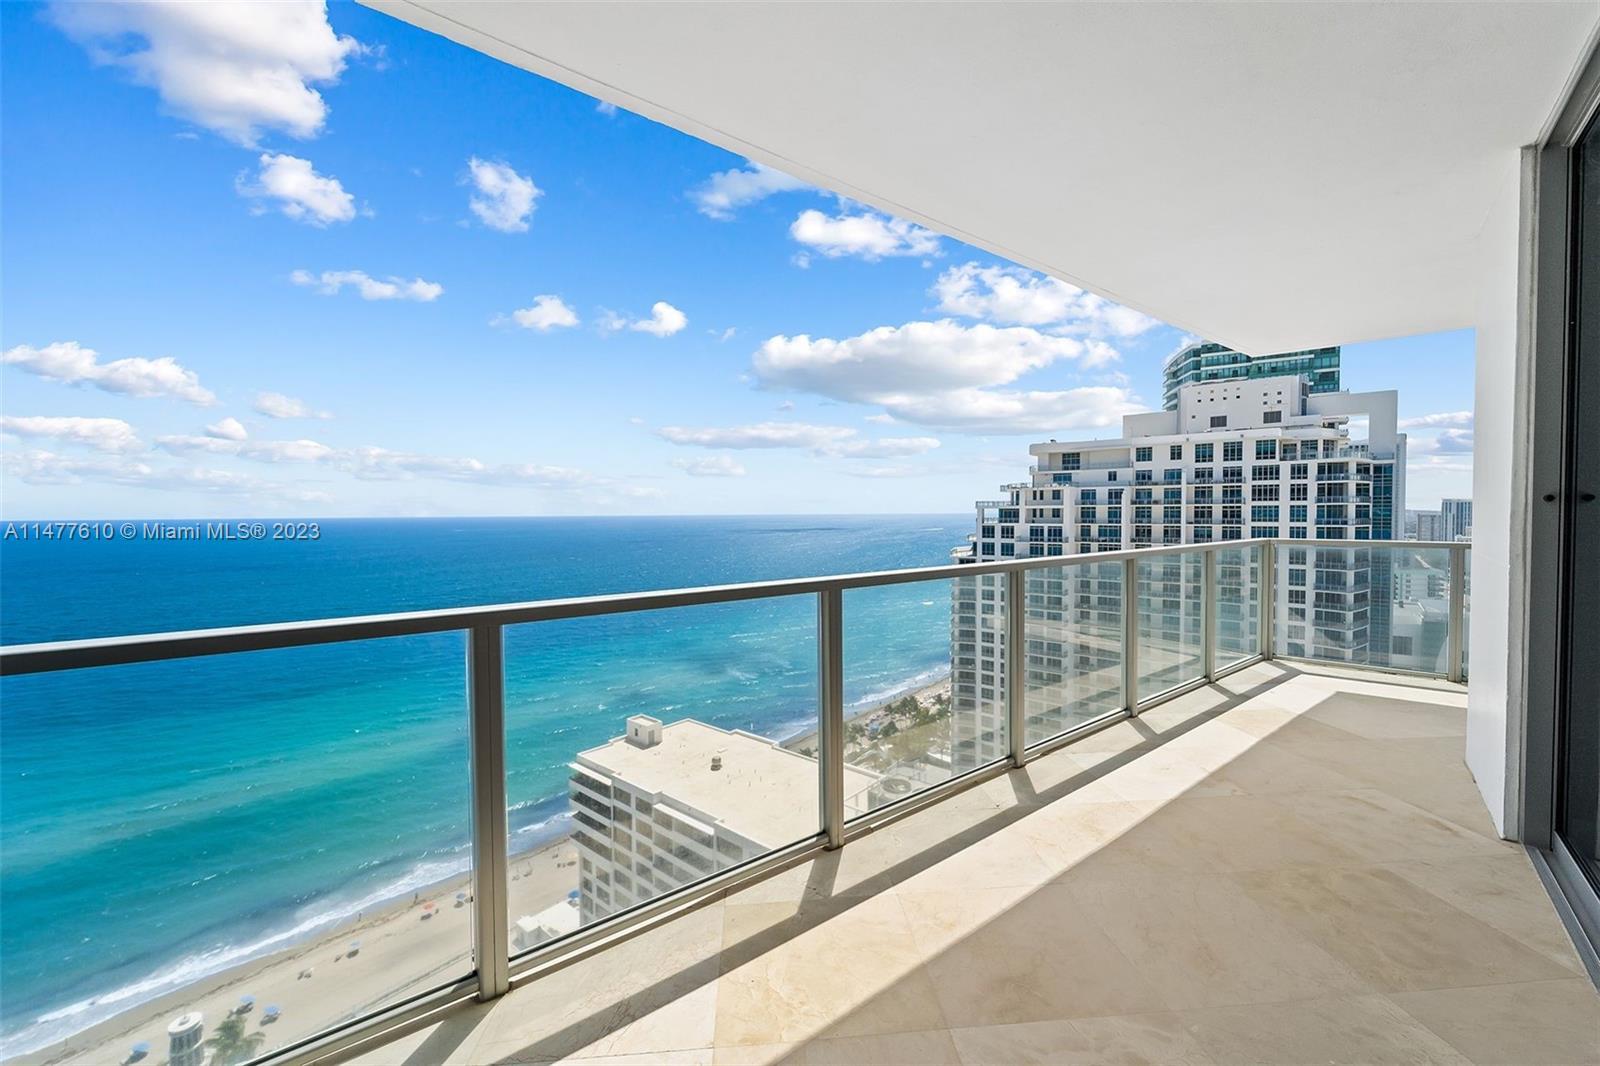 Photo of 3101 S Ocean Dr #2702 in Hollywood, FL